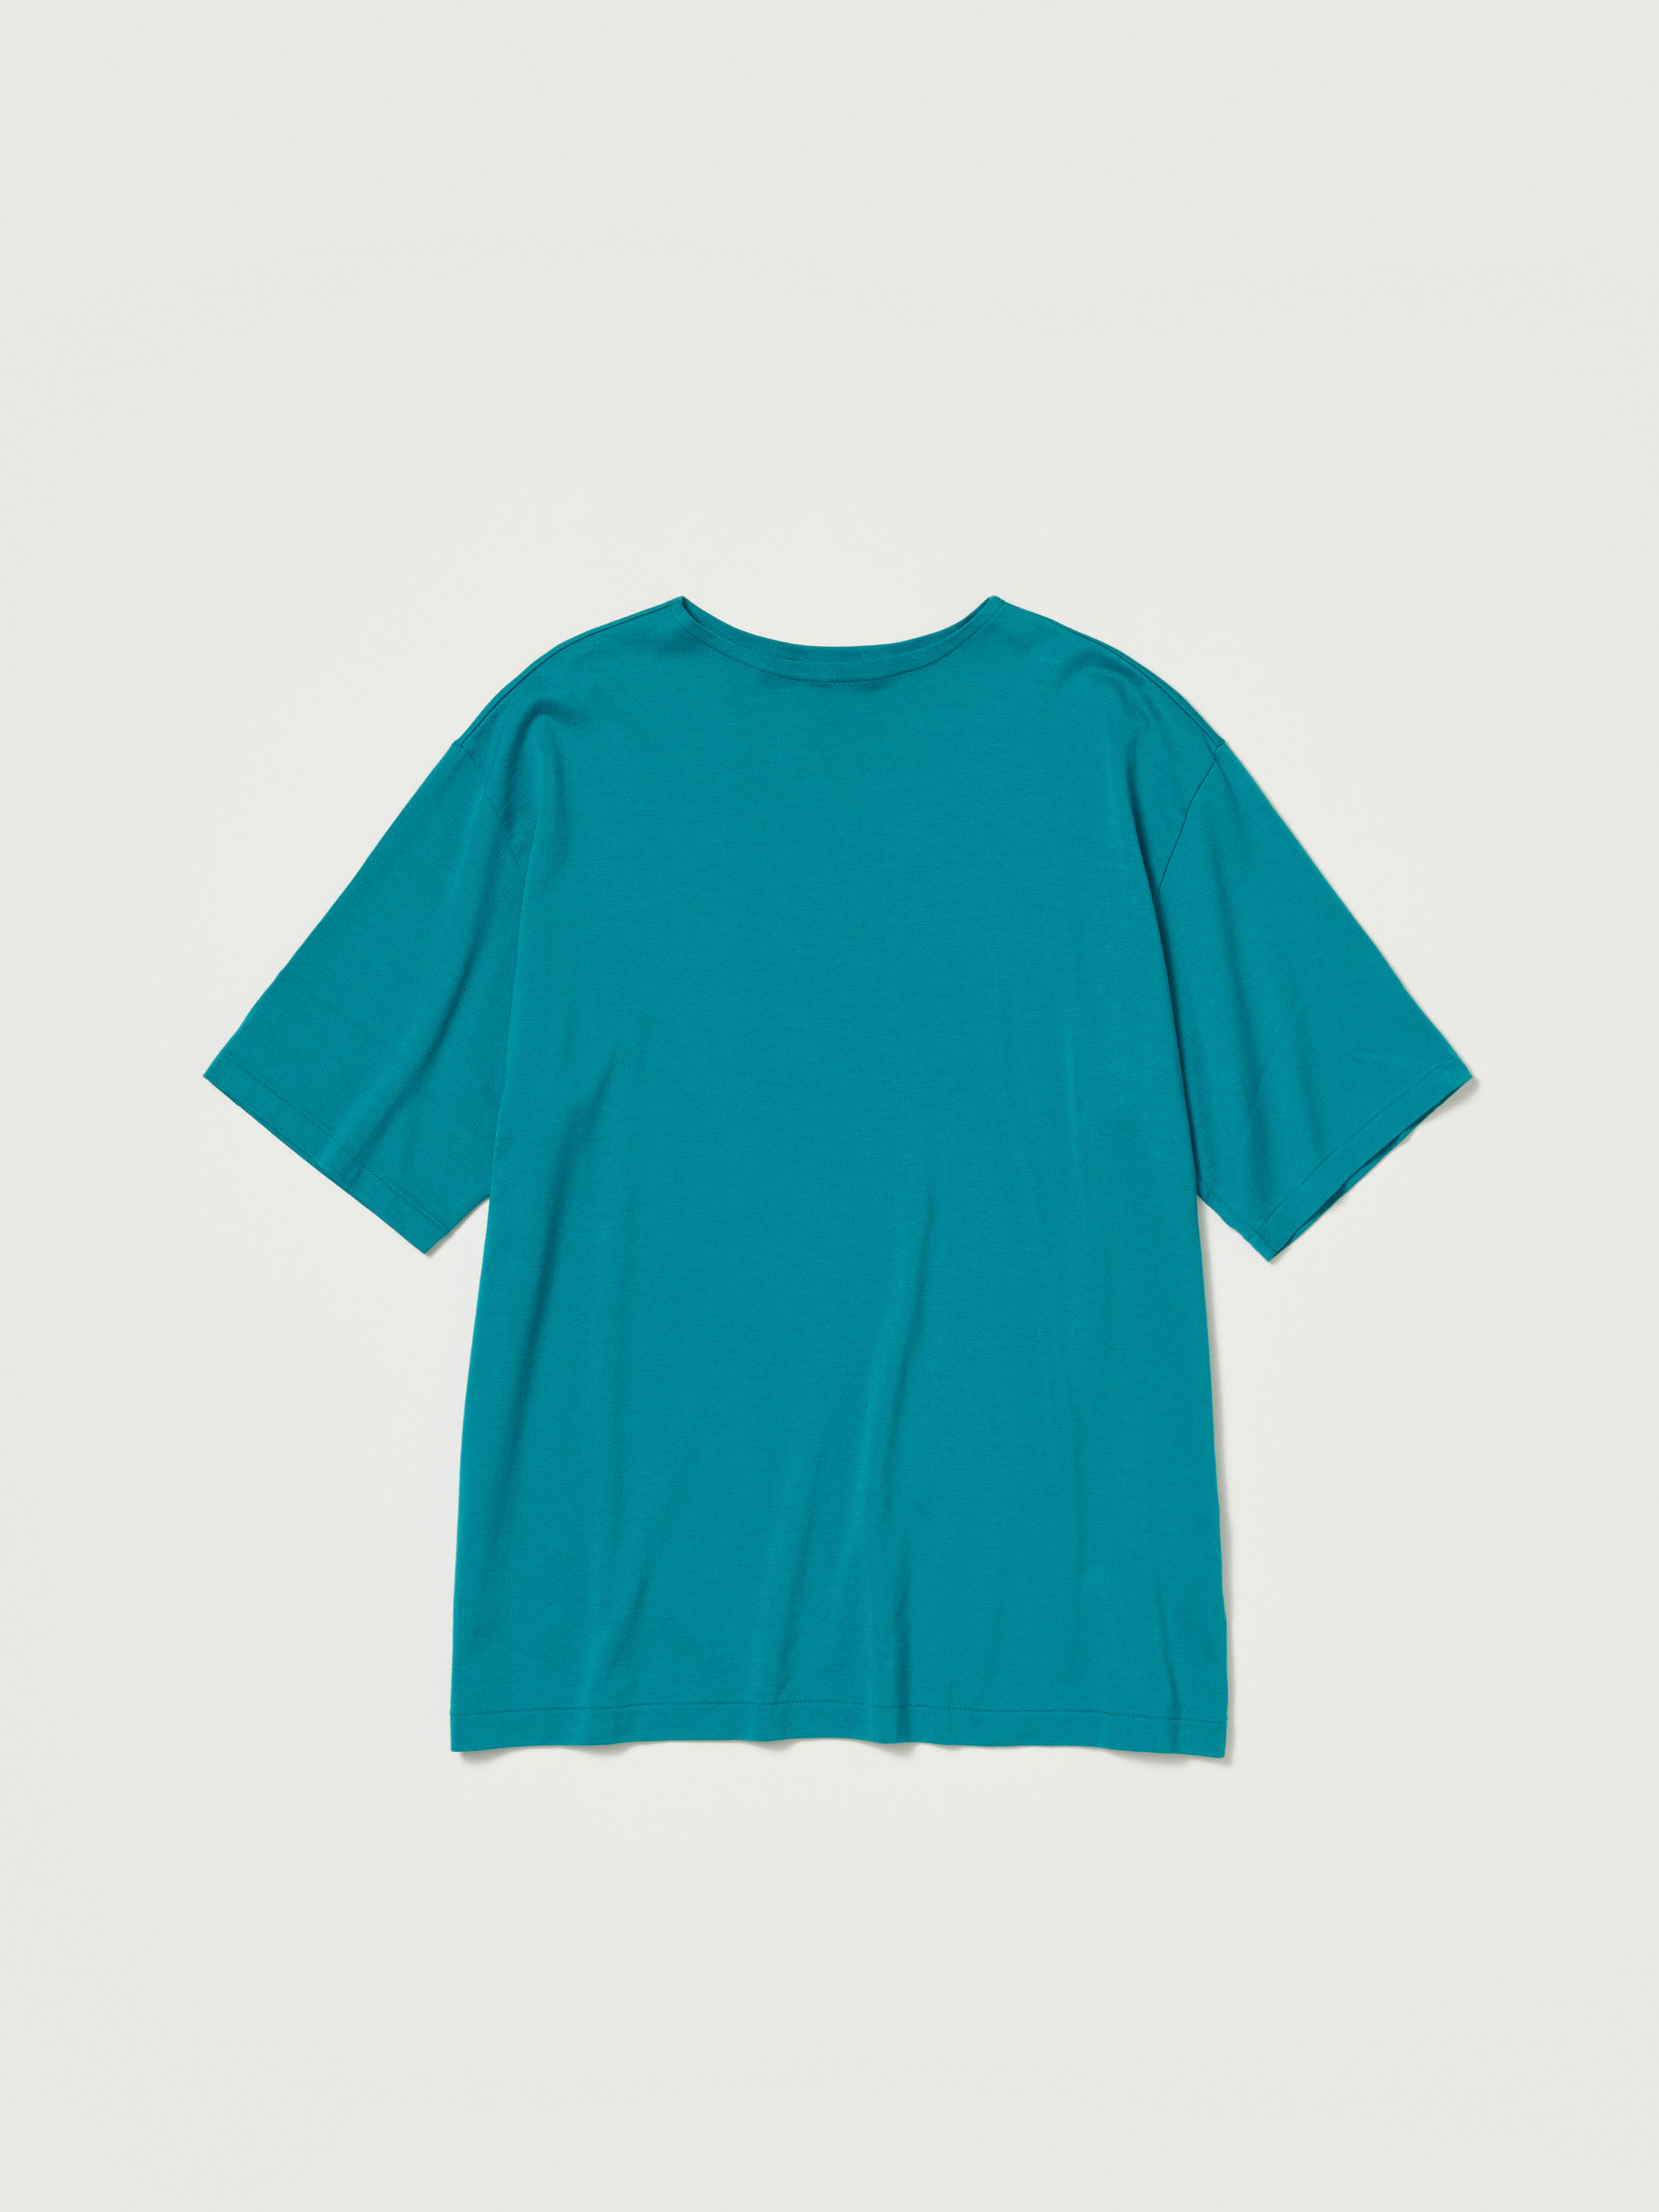 LUSTER PLAITING NARROW BOAT NECK TEE 詳細画像 TEAL GREEN 3